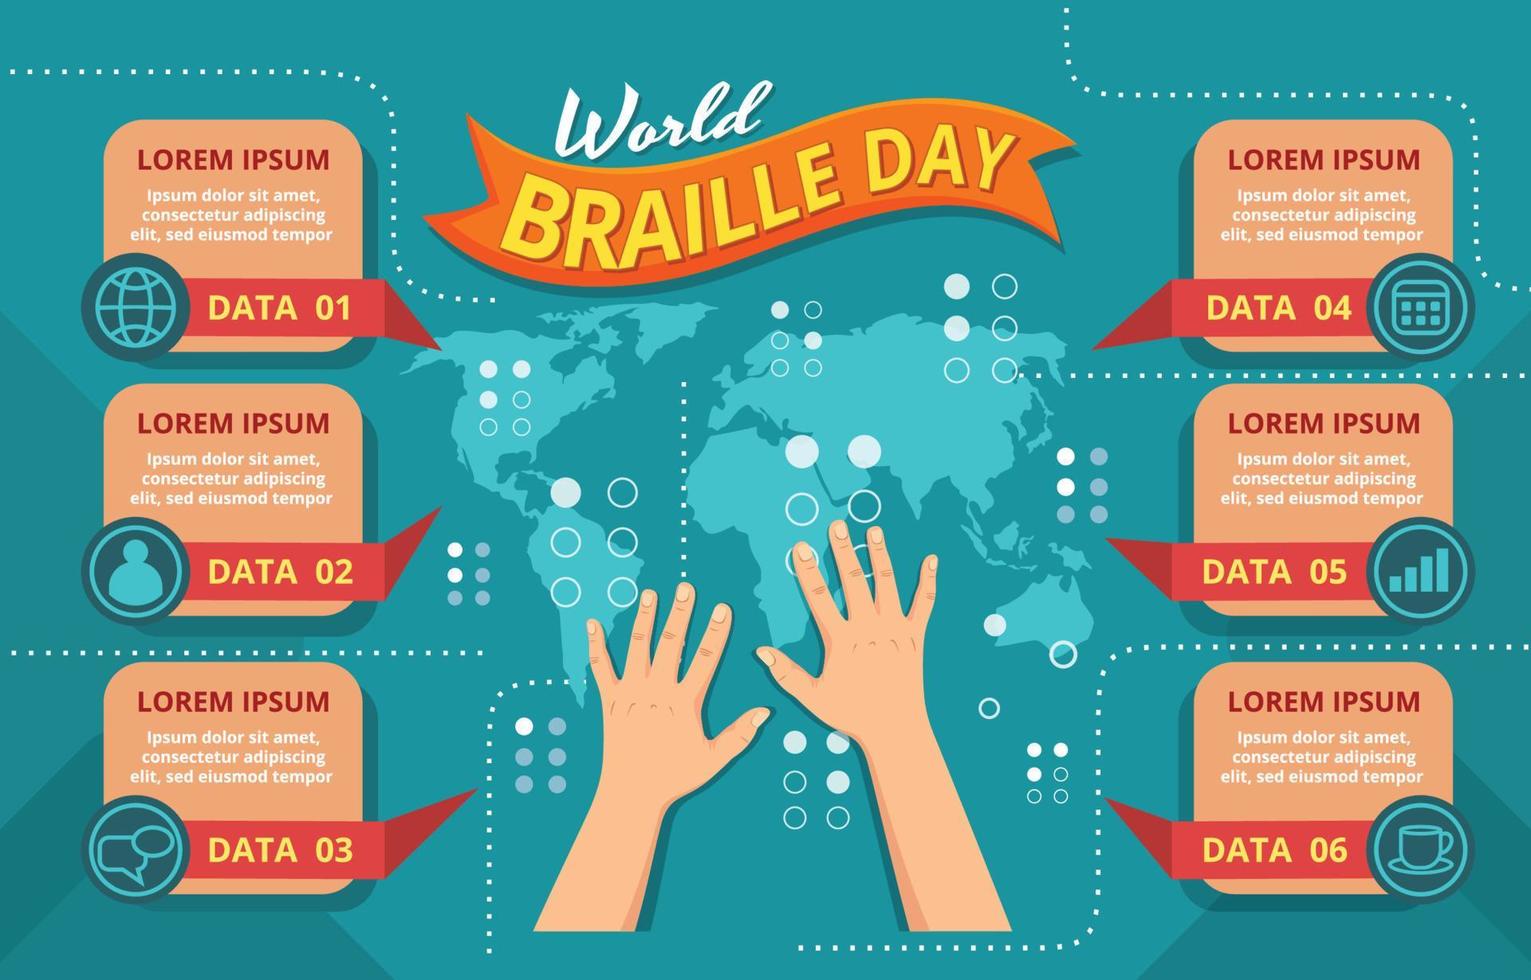 World Braille Day Infographic Template vector